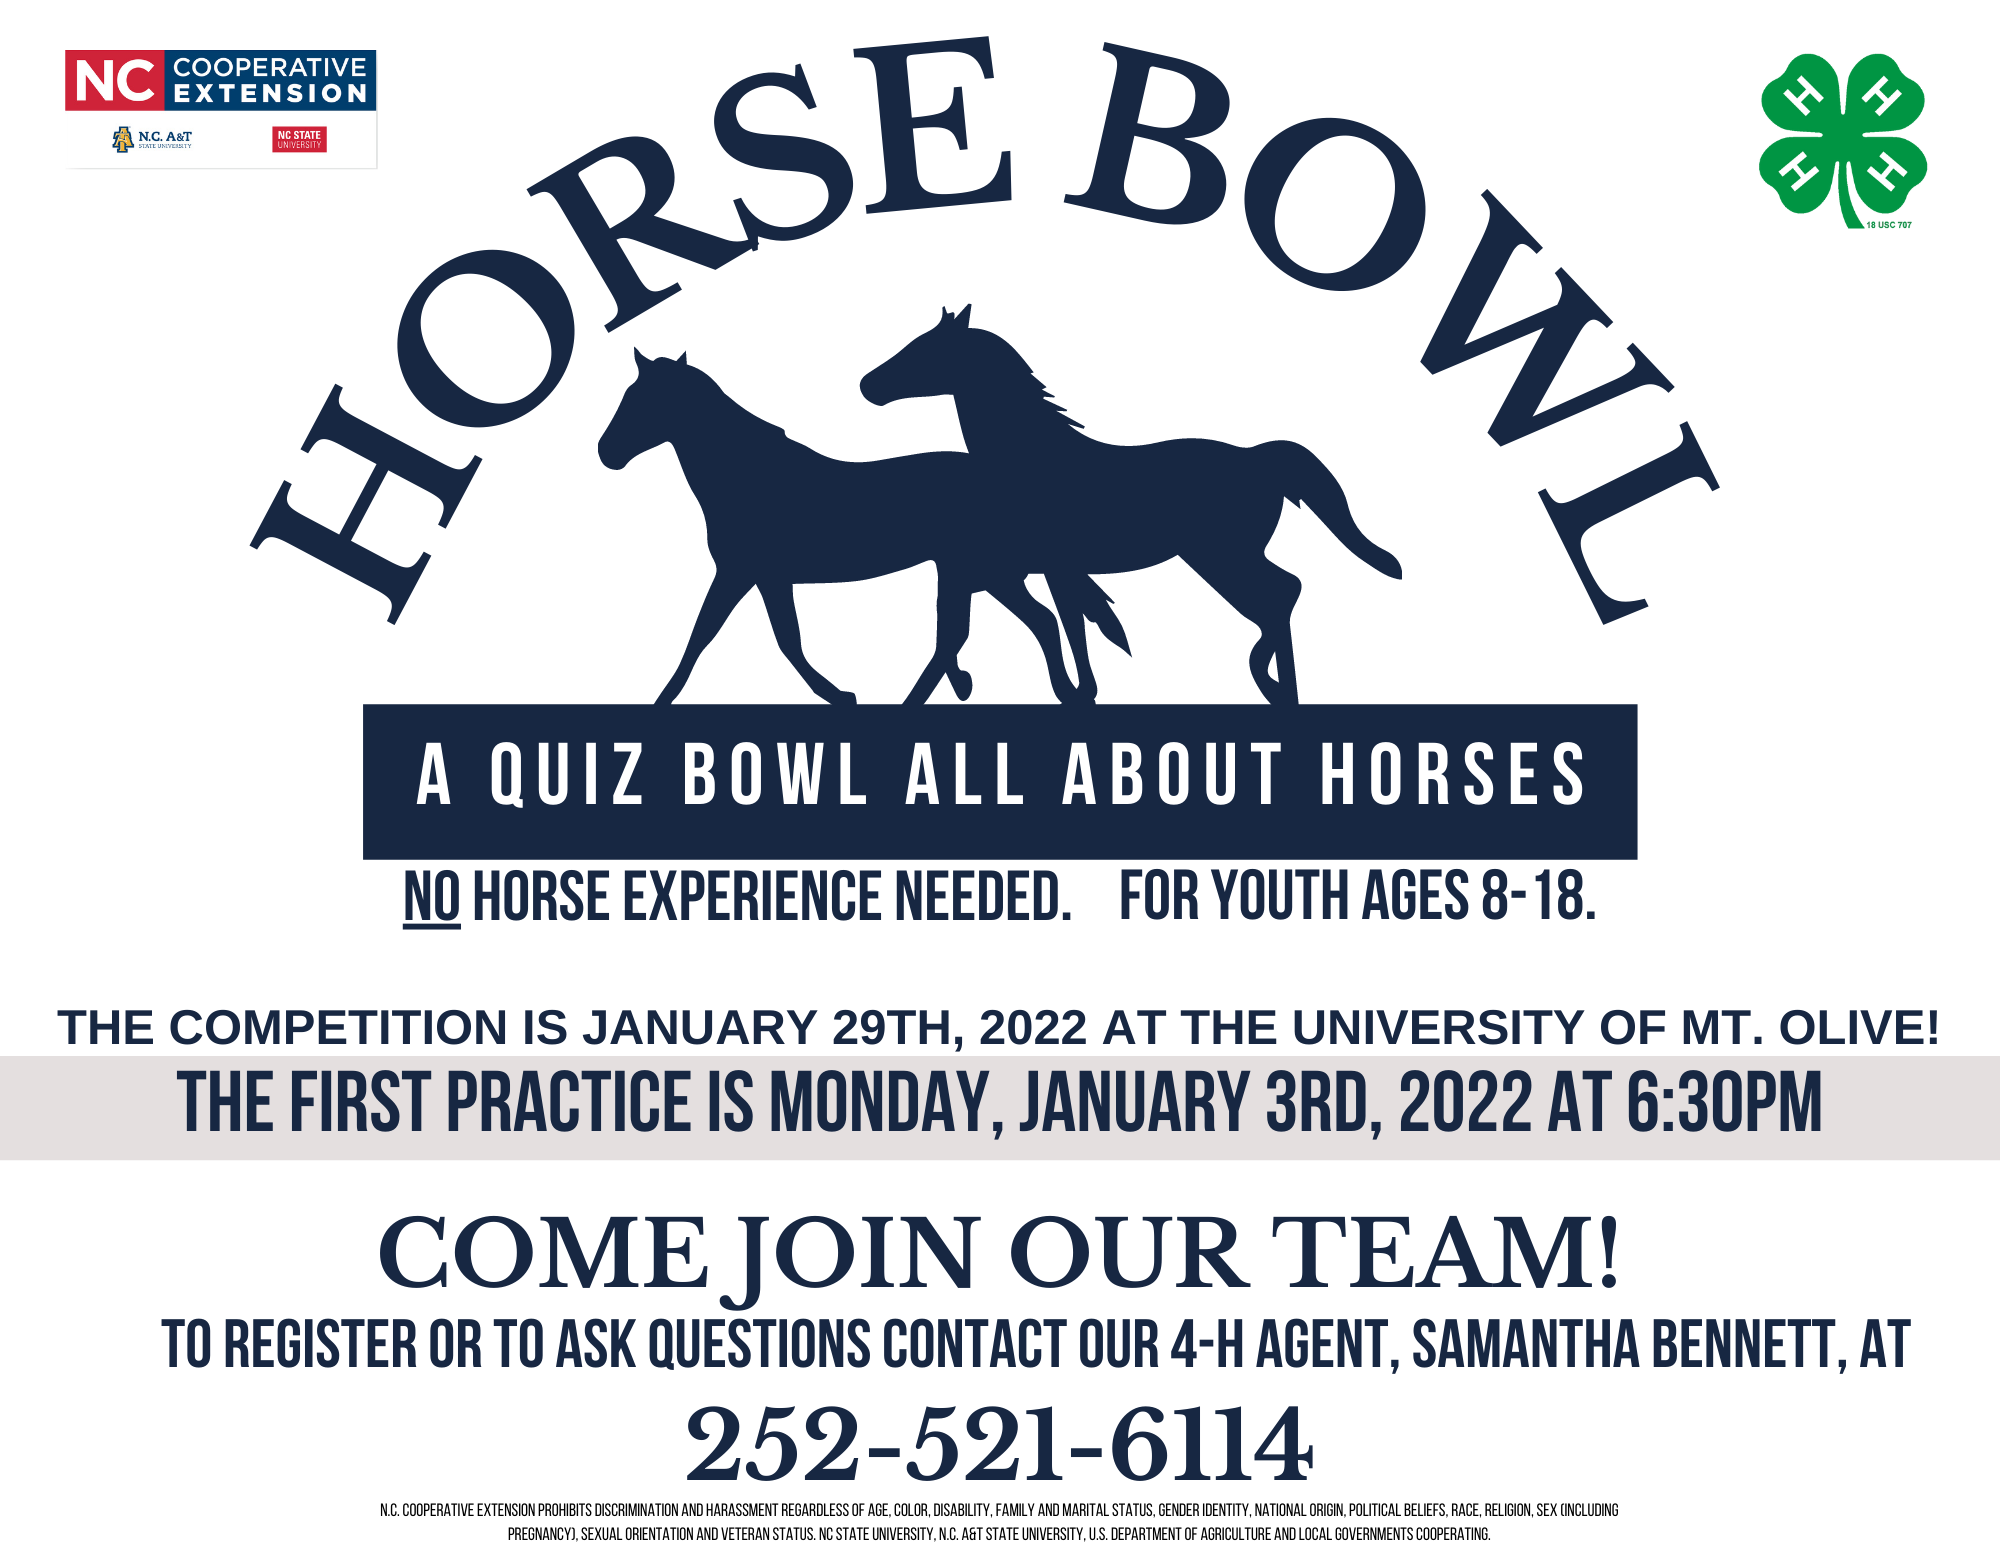 Horse Bowl - A quiz bowl all about horses! No horse experience needed! For youth ages 8-18! The competition is Jan. 29th, 2022 at the University of Mt. Olive! The first practice is Mon. Jan. 3rd, 2022 at 6:30 p.m.! Come join our team!!! To register or to ask questions contact our 4-H agent, Samantha Bennett, at 252-521-6114.